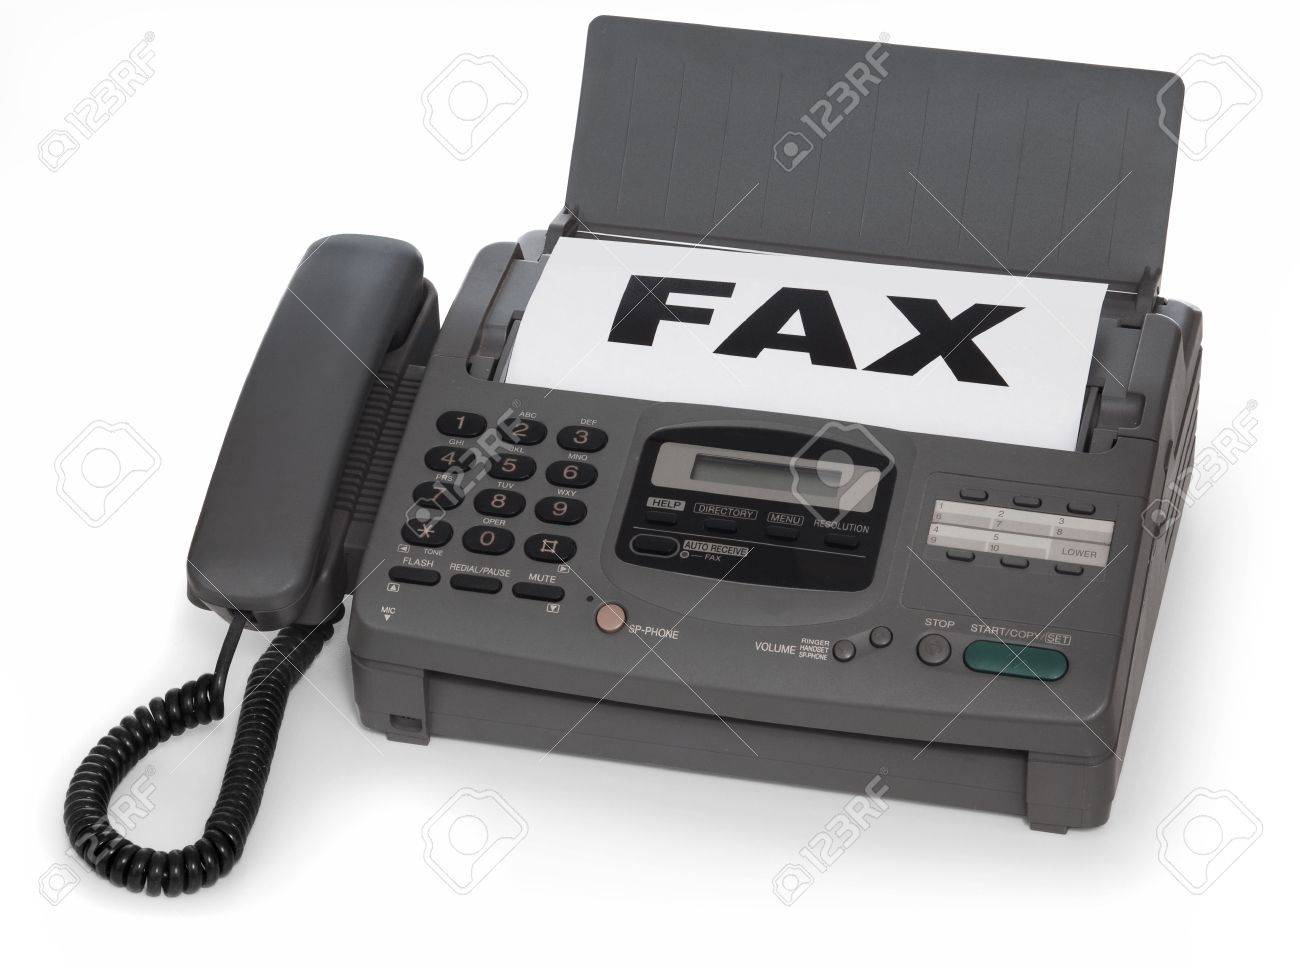 7052669-fax-machine-isolated-on-white-background.jpg